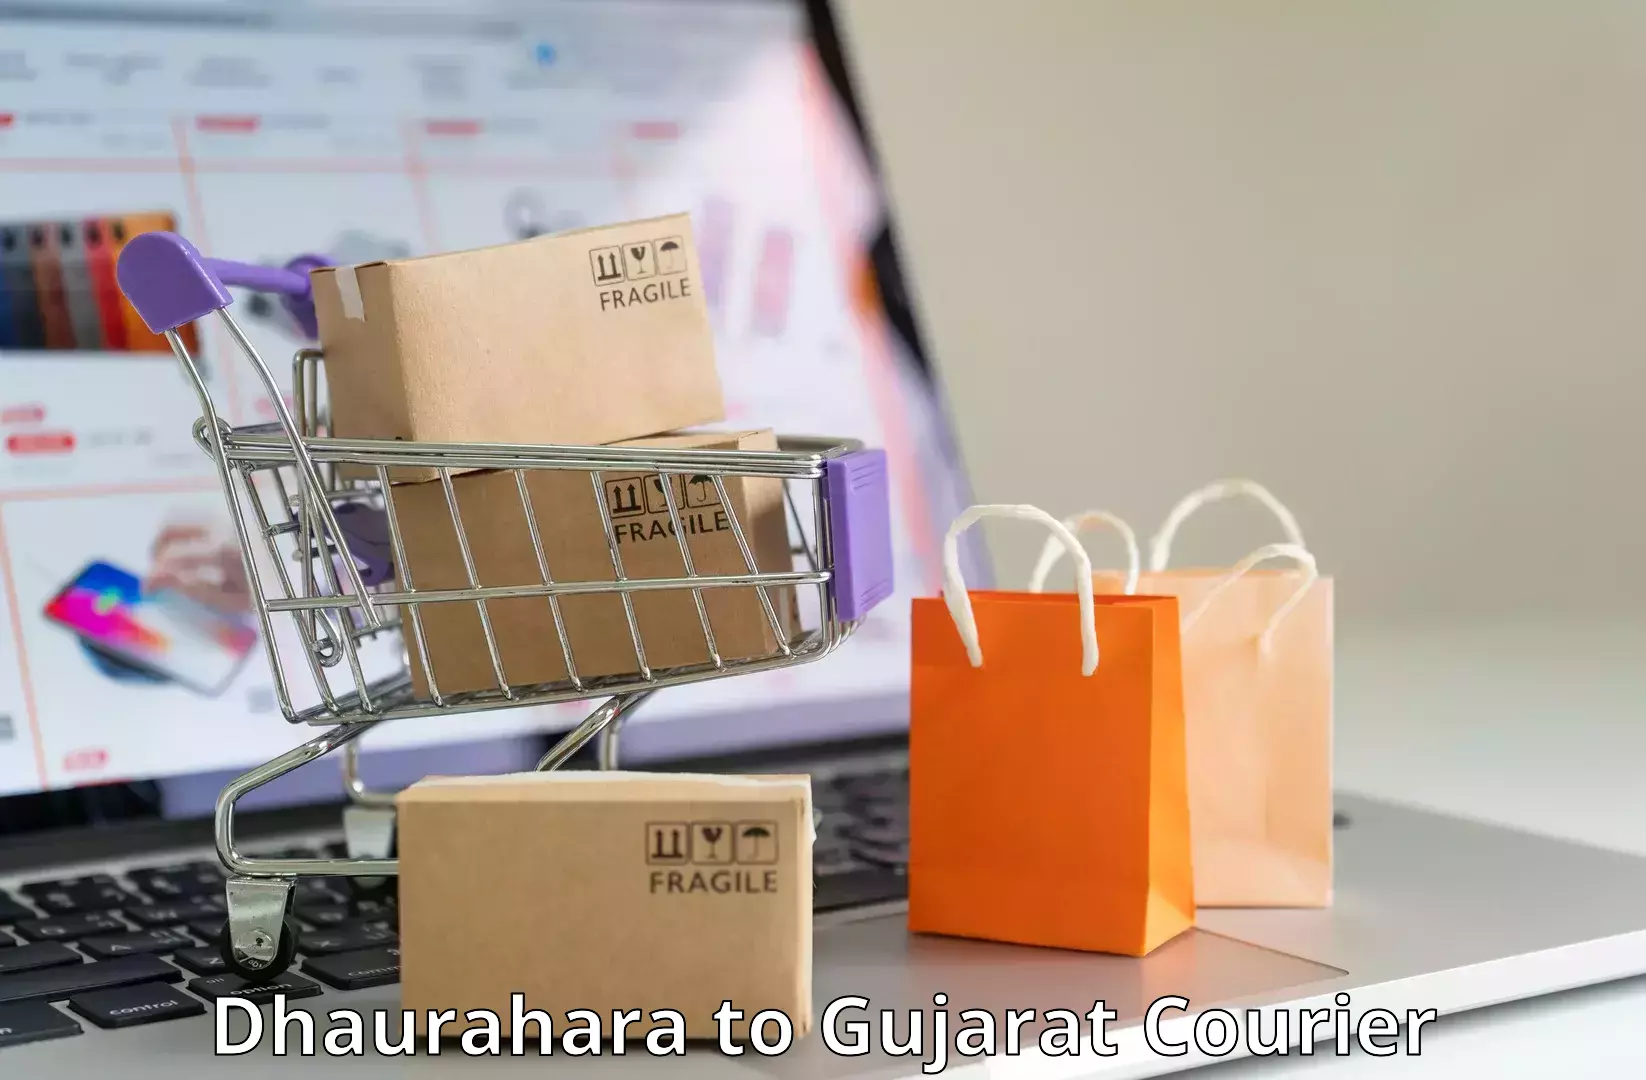 Flexible delivery scheduling Dhaurahara to Gujarat